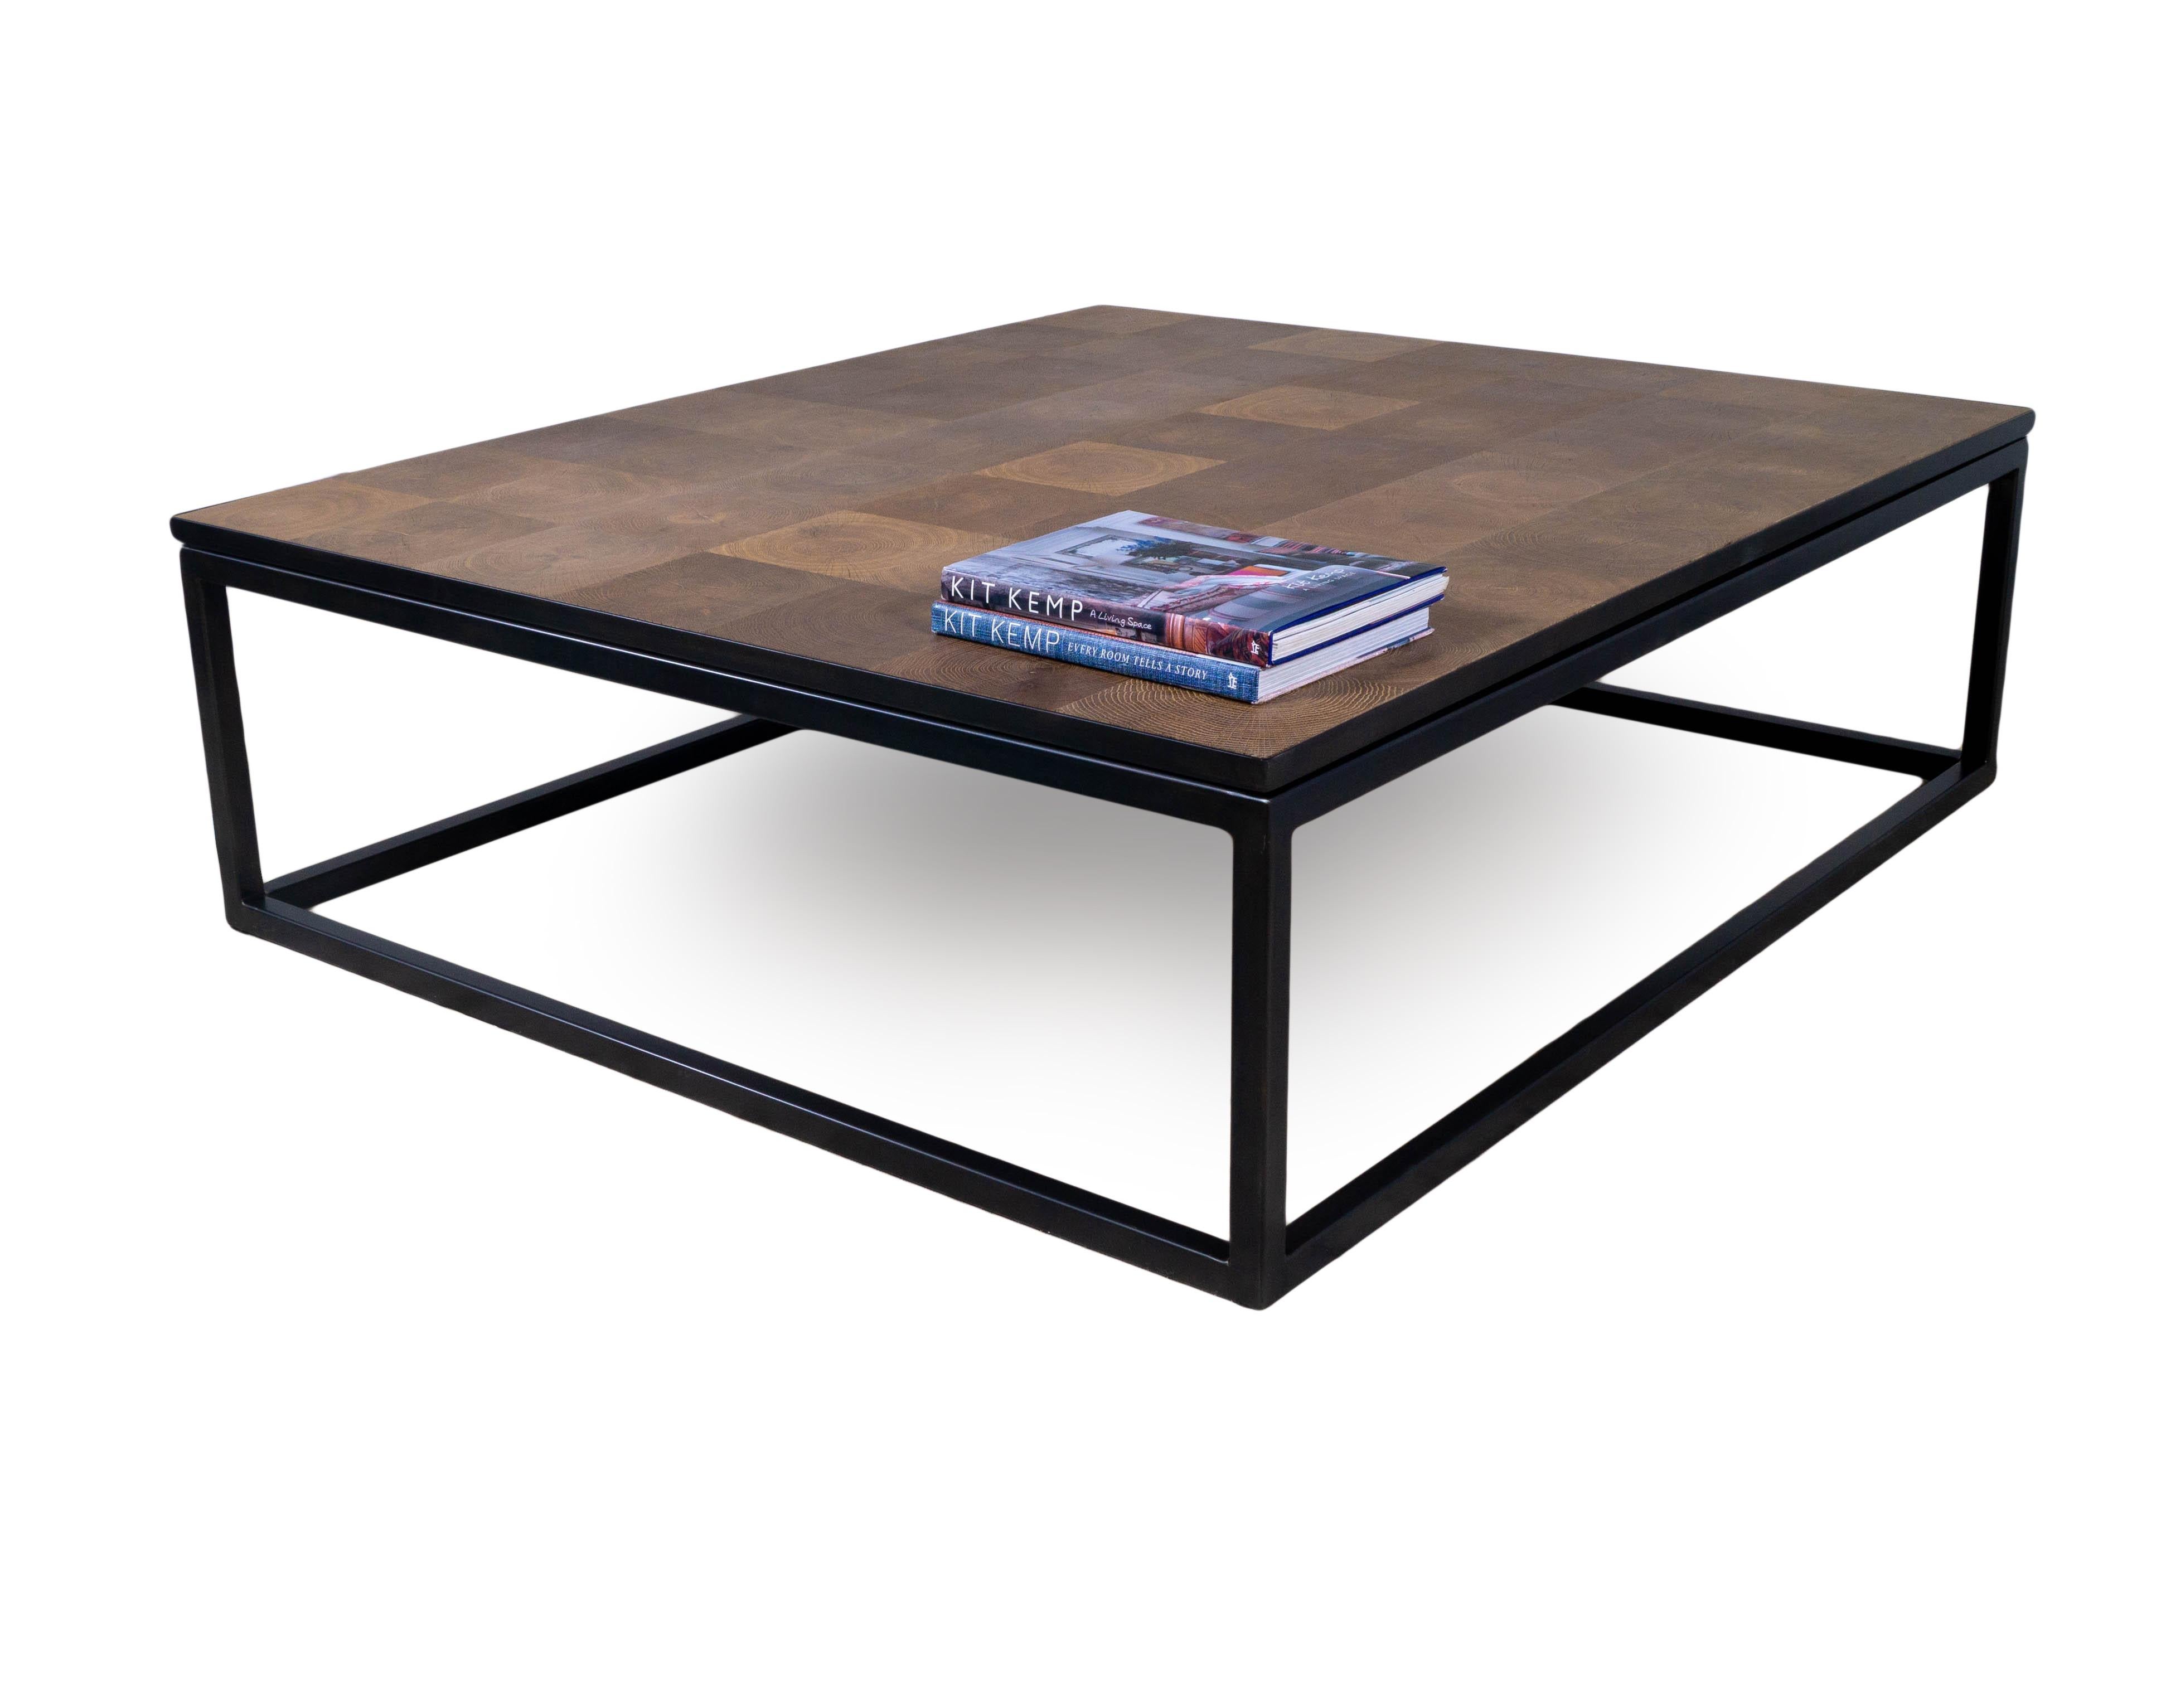 This end cut oak with plank top and metal base coffee table is a part of our Vision & Design collection which is designed by and exculsive to Brendan Bass. This coffee table features squares of end cut oak which celebrates the beauty and life of the